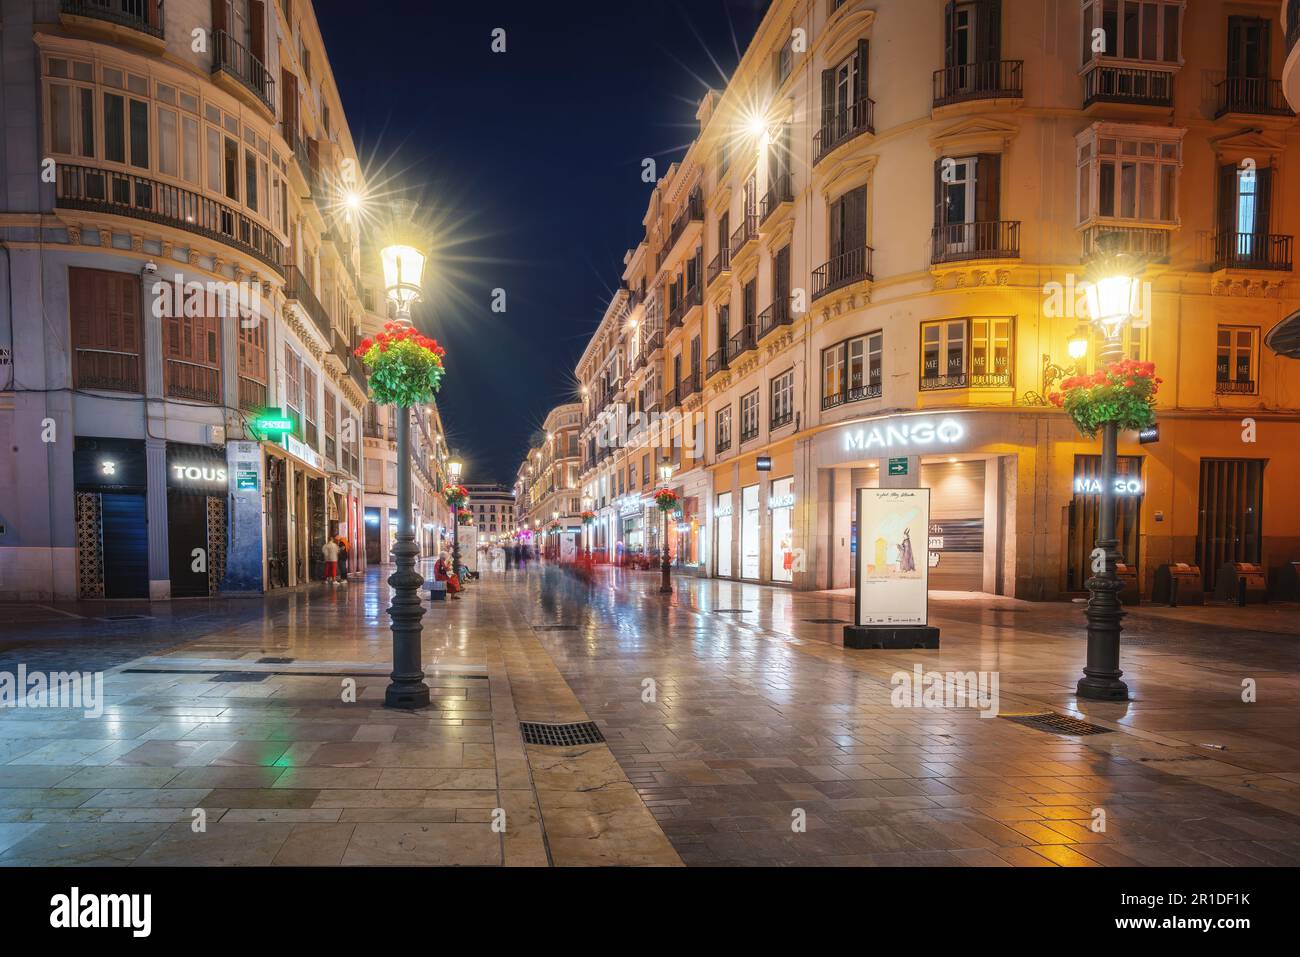 Calle Larios at night - famous pedestrian and shopping street - Malaga, Andalusia, Spain Stock Photo